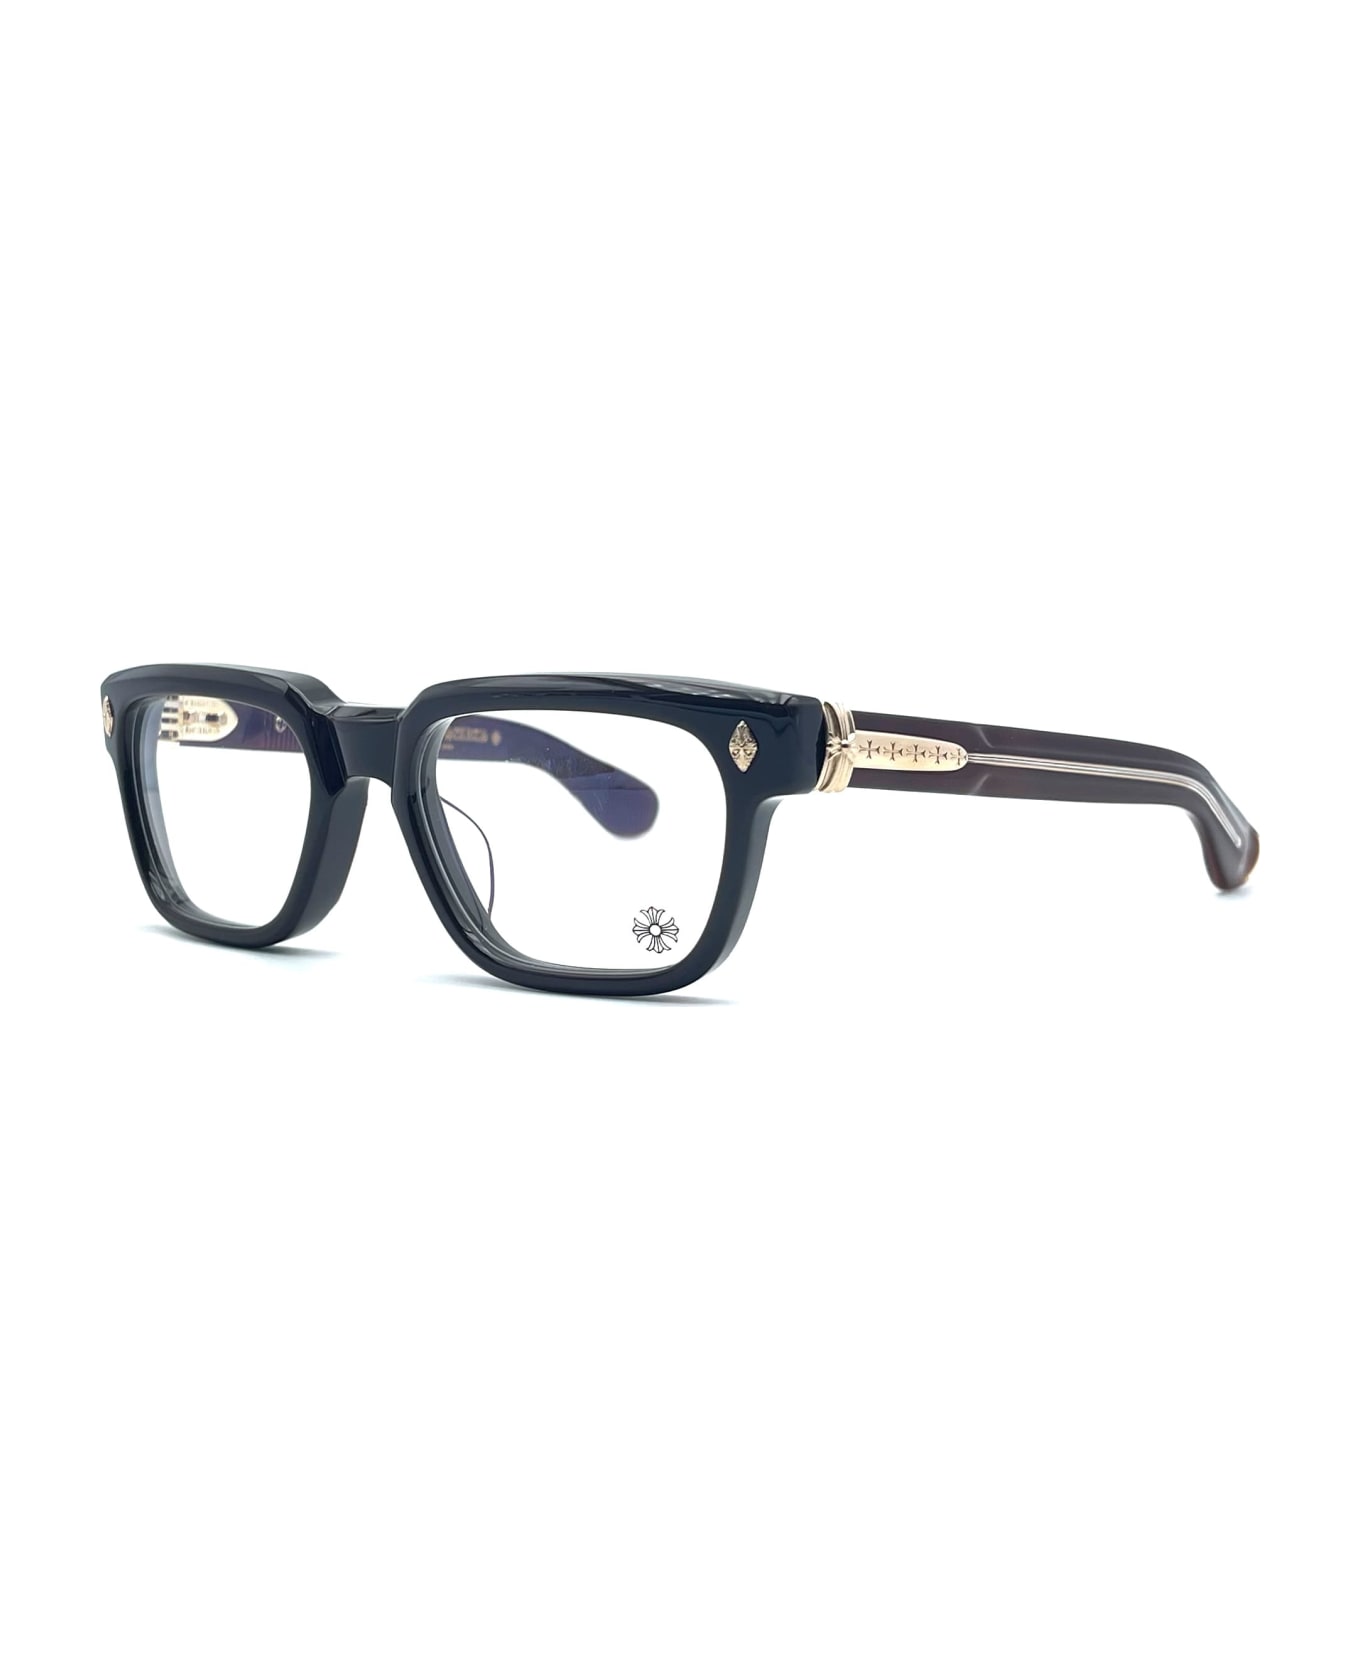 Chrome Hearts Pen 15 - Classic Brown Rx Glasses - brown